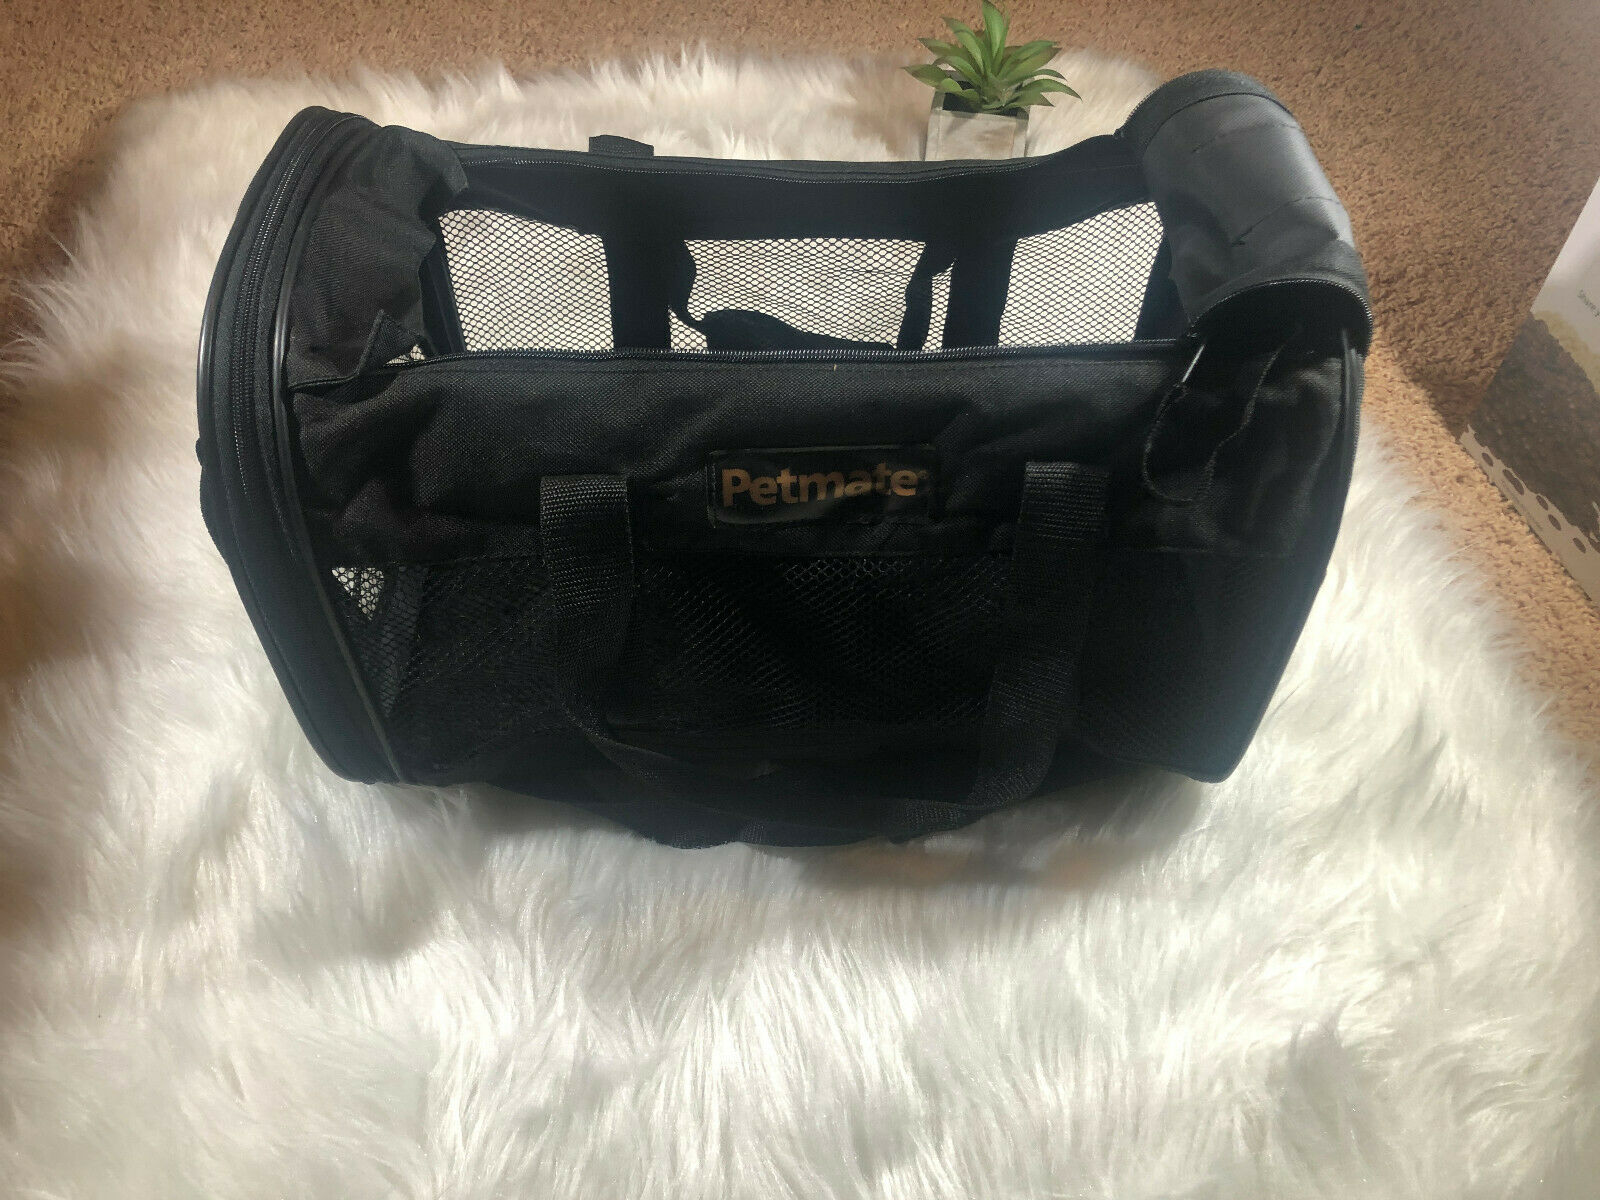 Petmate Soft-sided Kennel Cab Pet Carrier Black Up To 15lbs